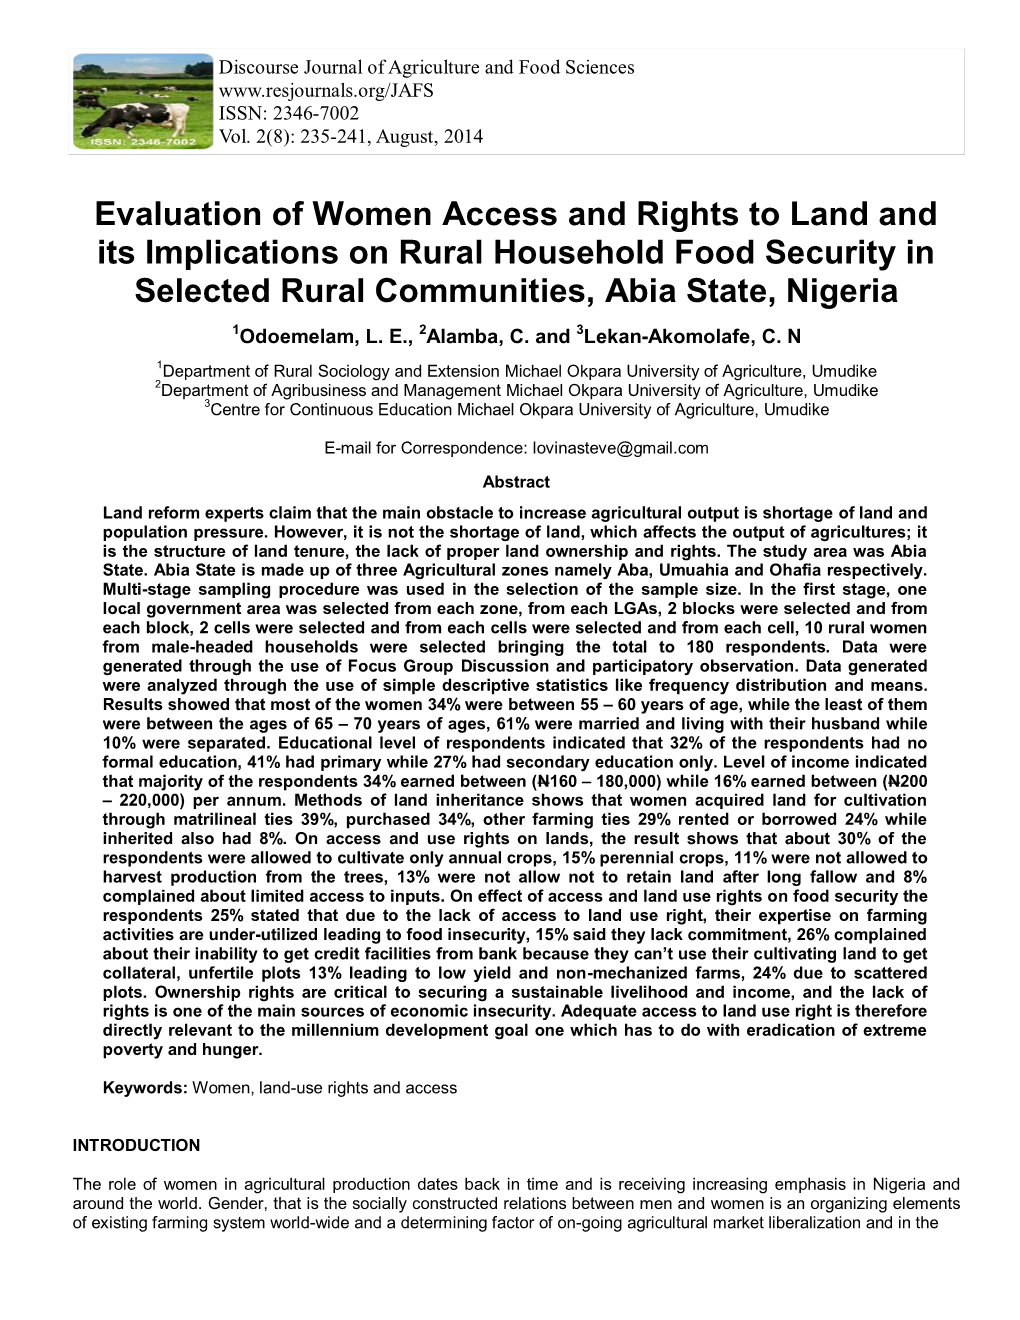 Evaluation of Women Access and Rights to Land and Its Implications on Rural Household Food Security in Selected Rural Communities, Abia State, Nigeria